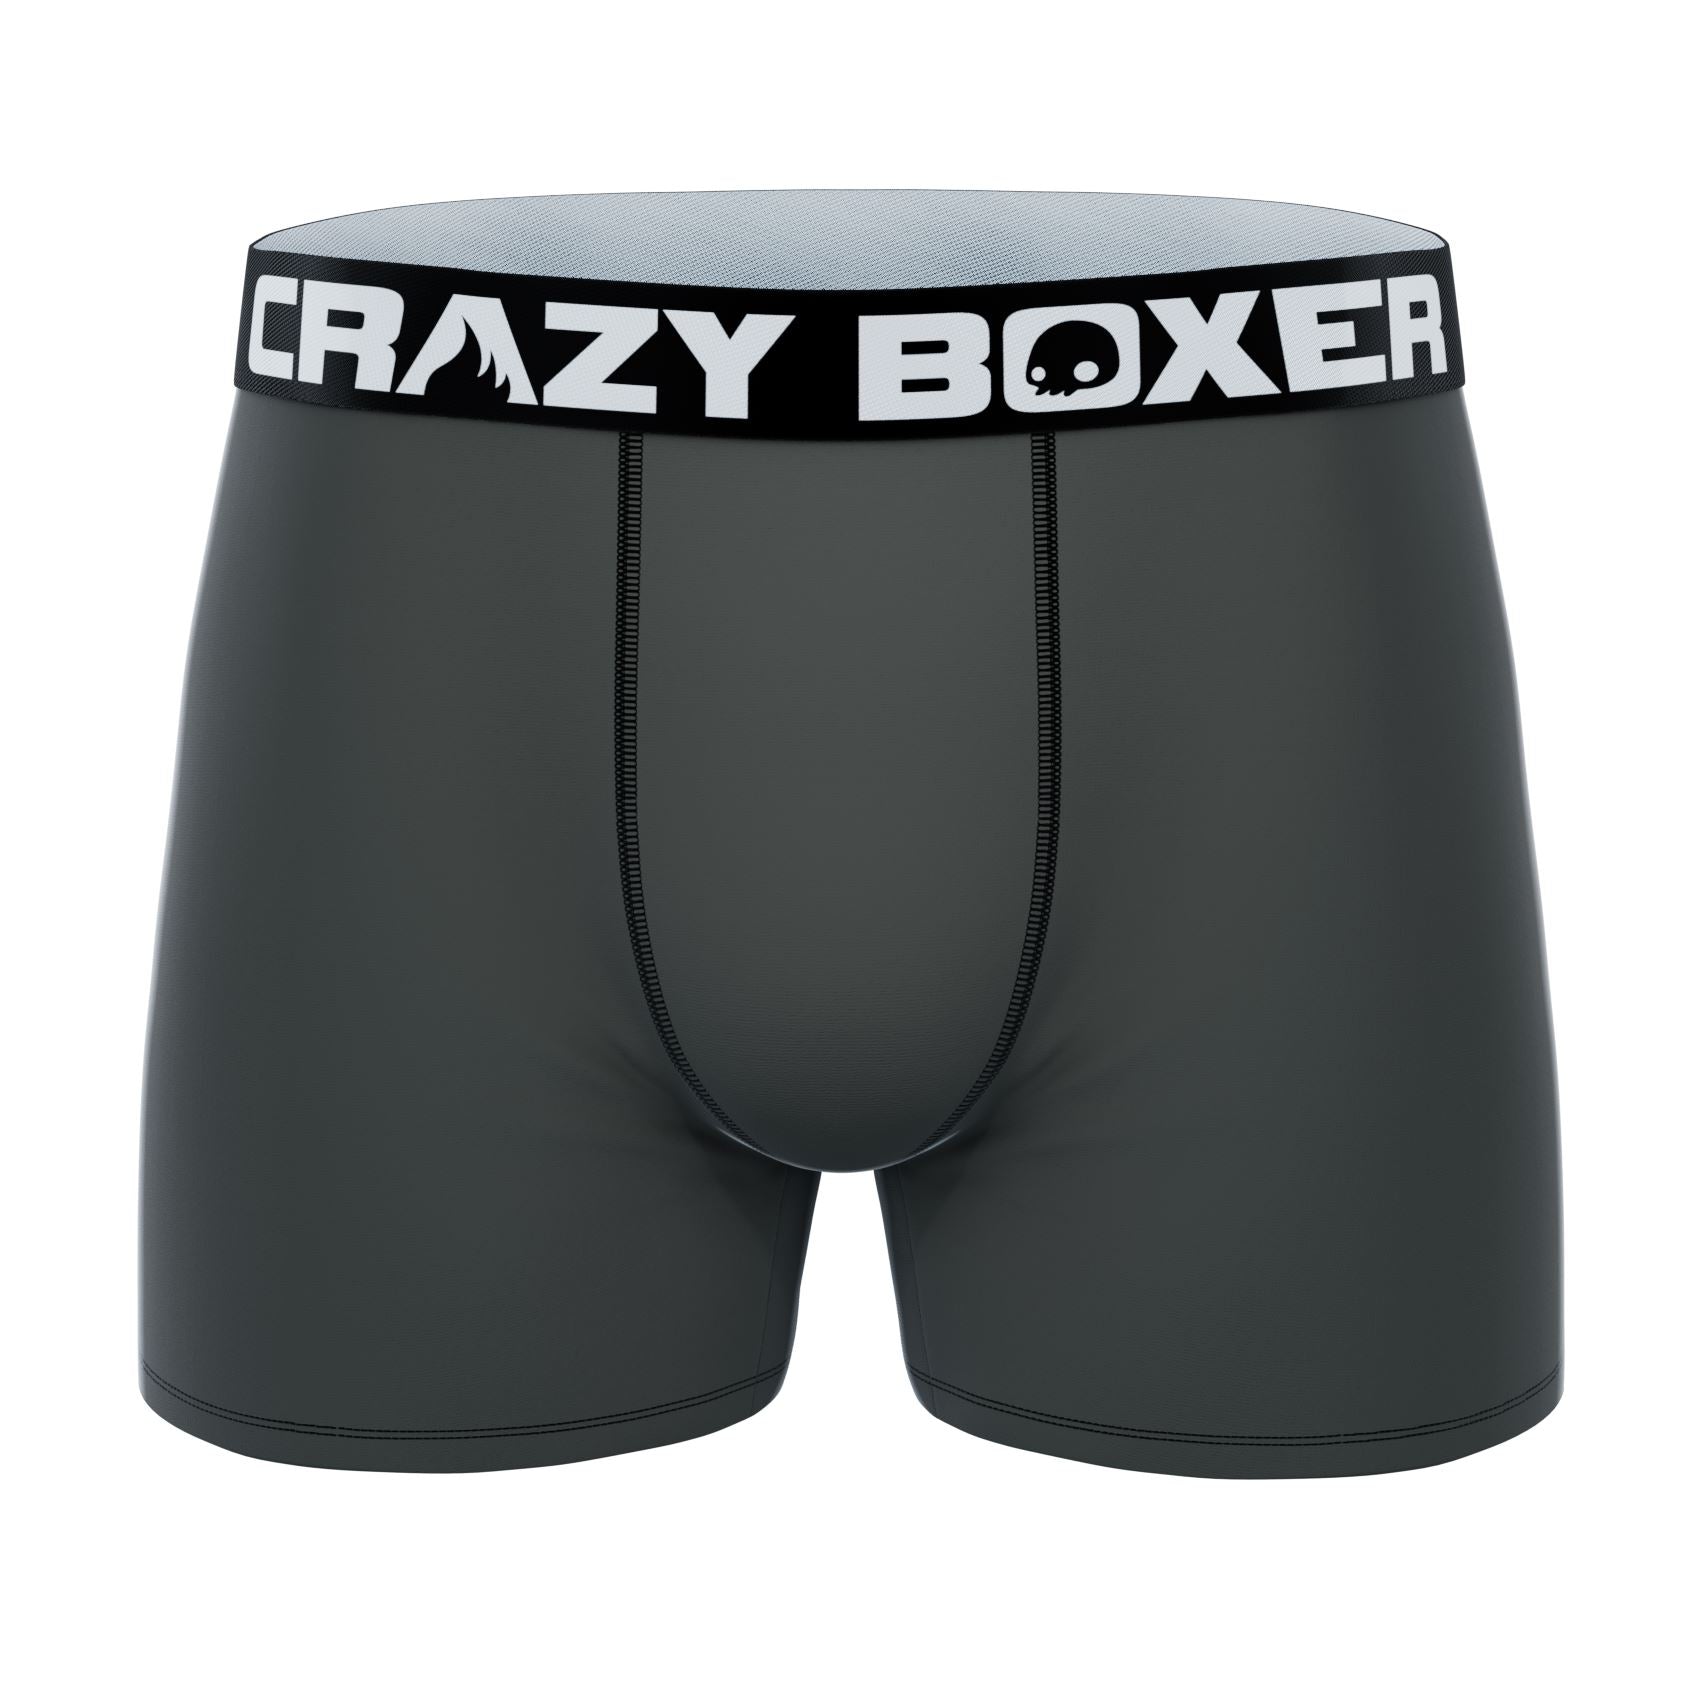 CRAZYBOXER Mountain Dew Logo And All Over; Men's Boxer Briefs, 3 Pack 